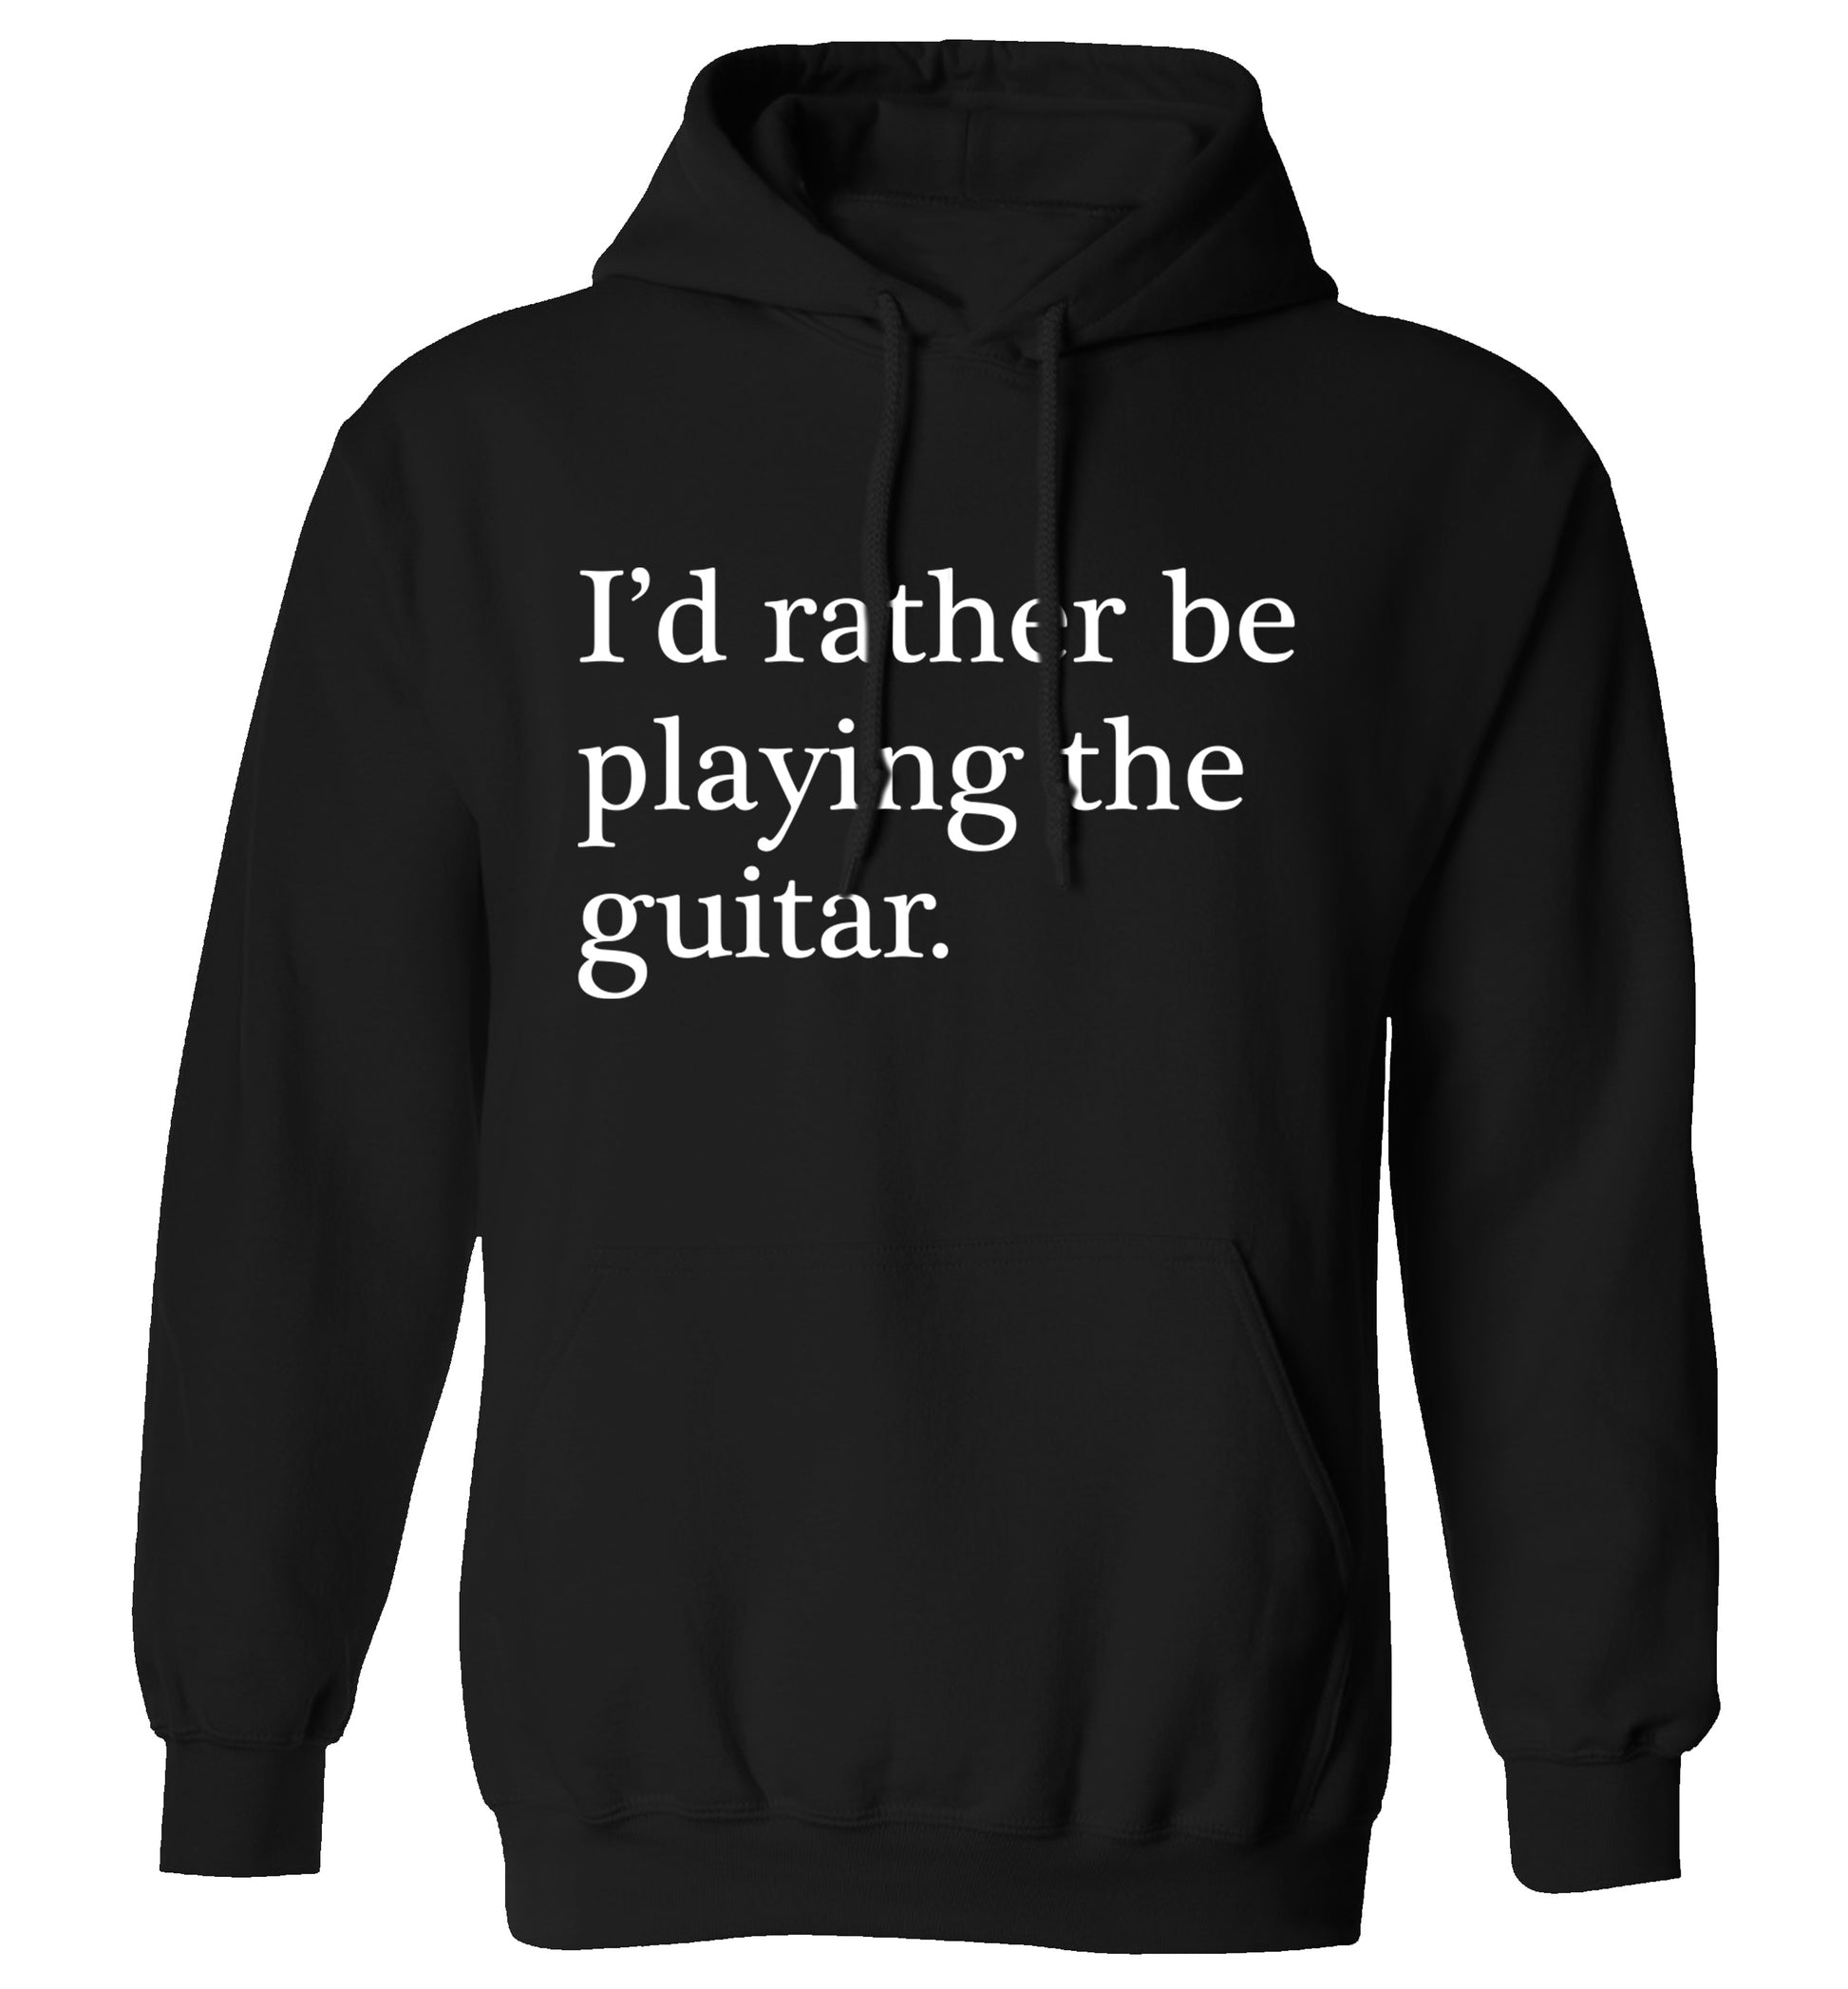 I'd rather be playing the guitar adults unisex black hoodie 2XL